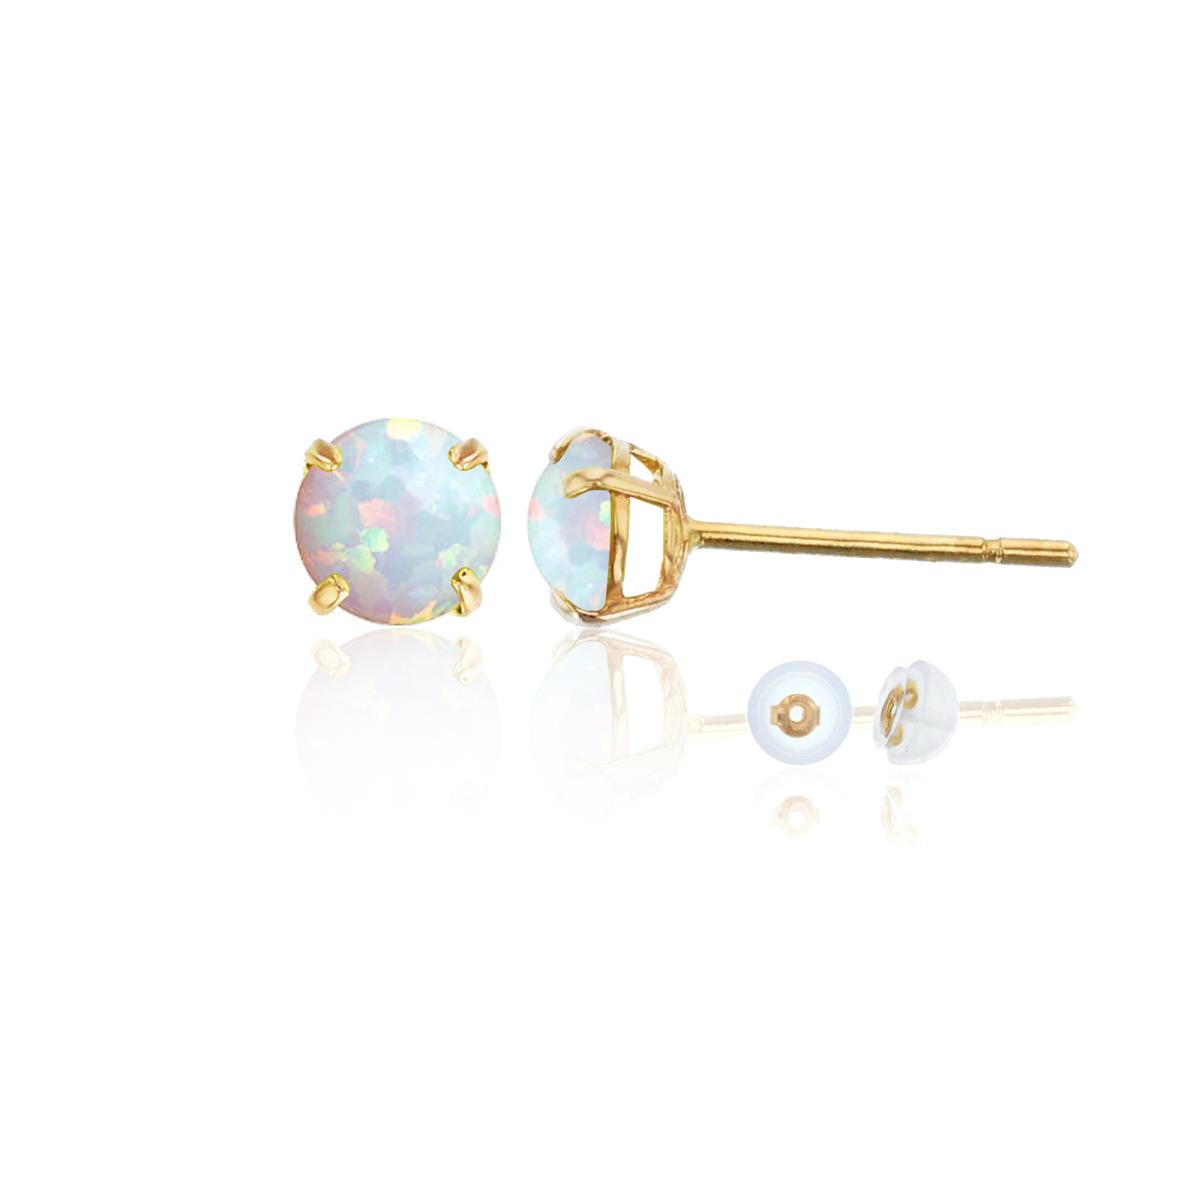 10K Gold Yellow 4MM Basket Set Created Opal Stud Earrings with Bubble Silicon Backs